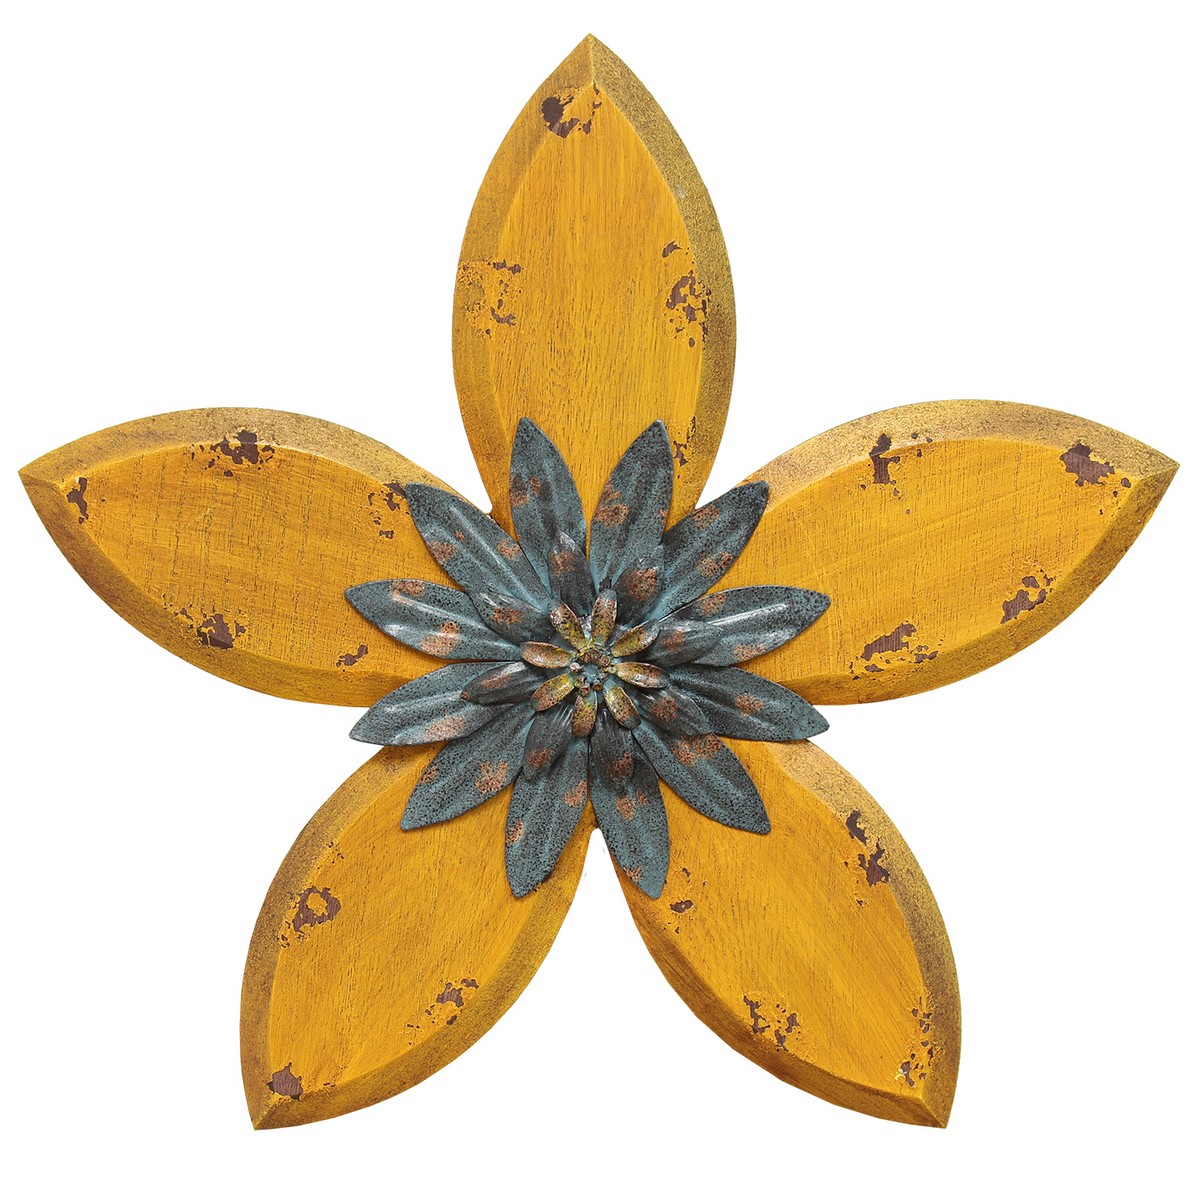 Stratton Home Decor Antique Flower Wall Decor - Yellow/Teal